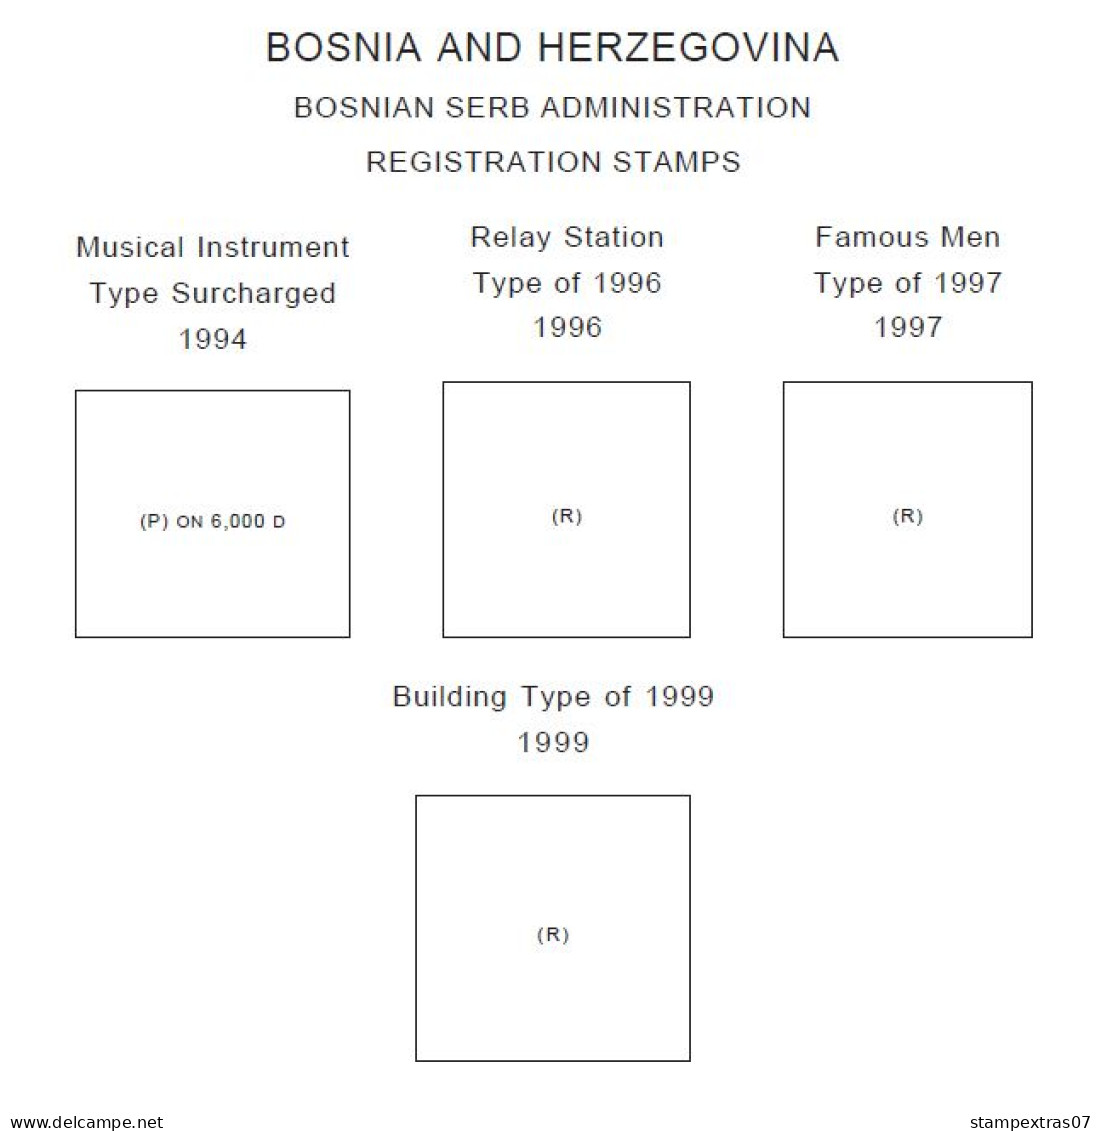 BOSNIA & HERZEGOVINA STAMP ALBUM PAGES 1879-2011 (218 Pages) - Englisch